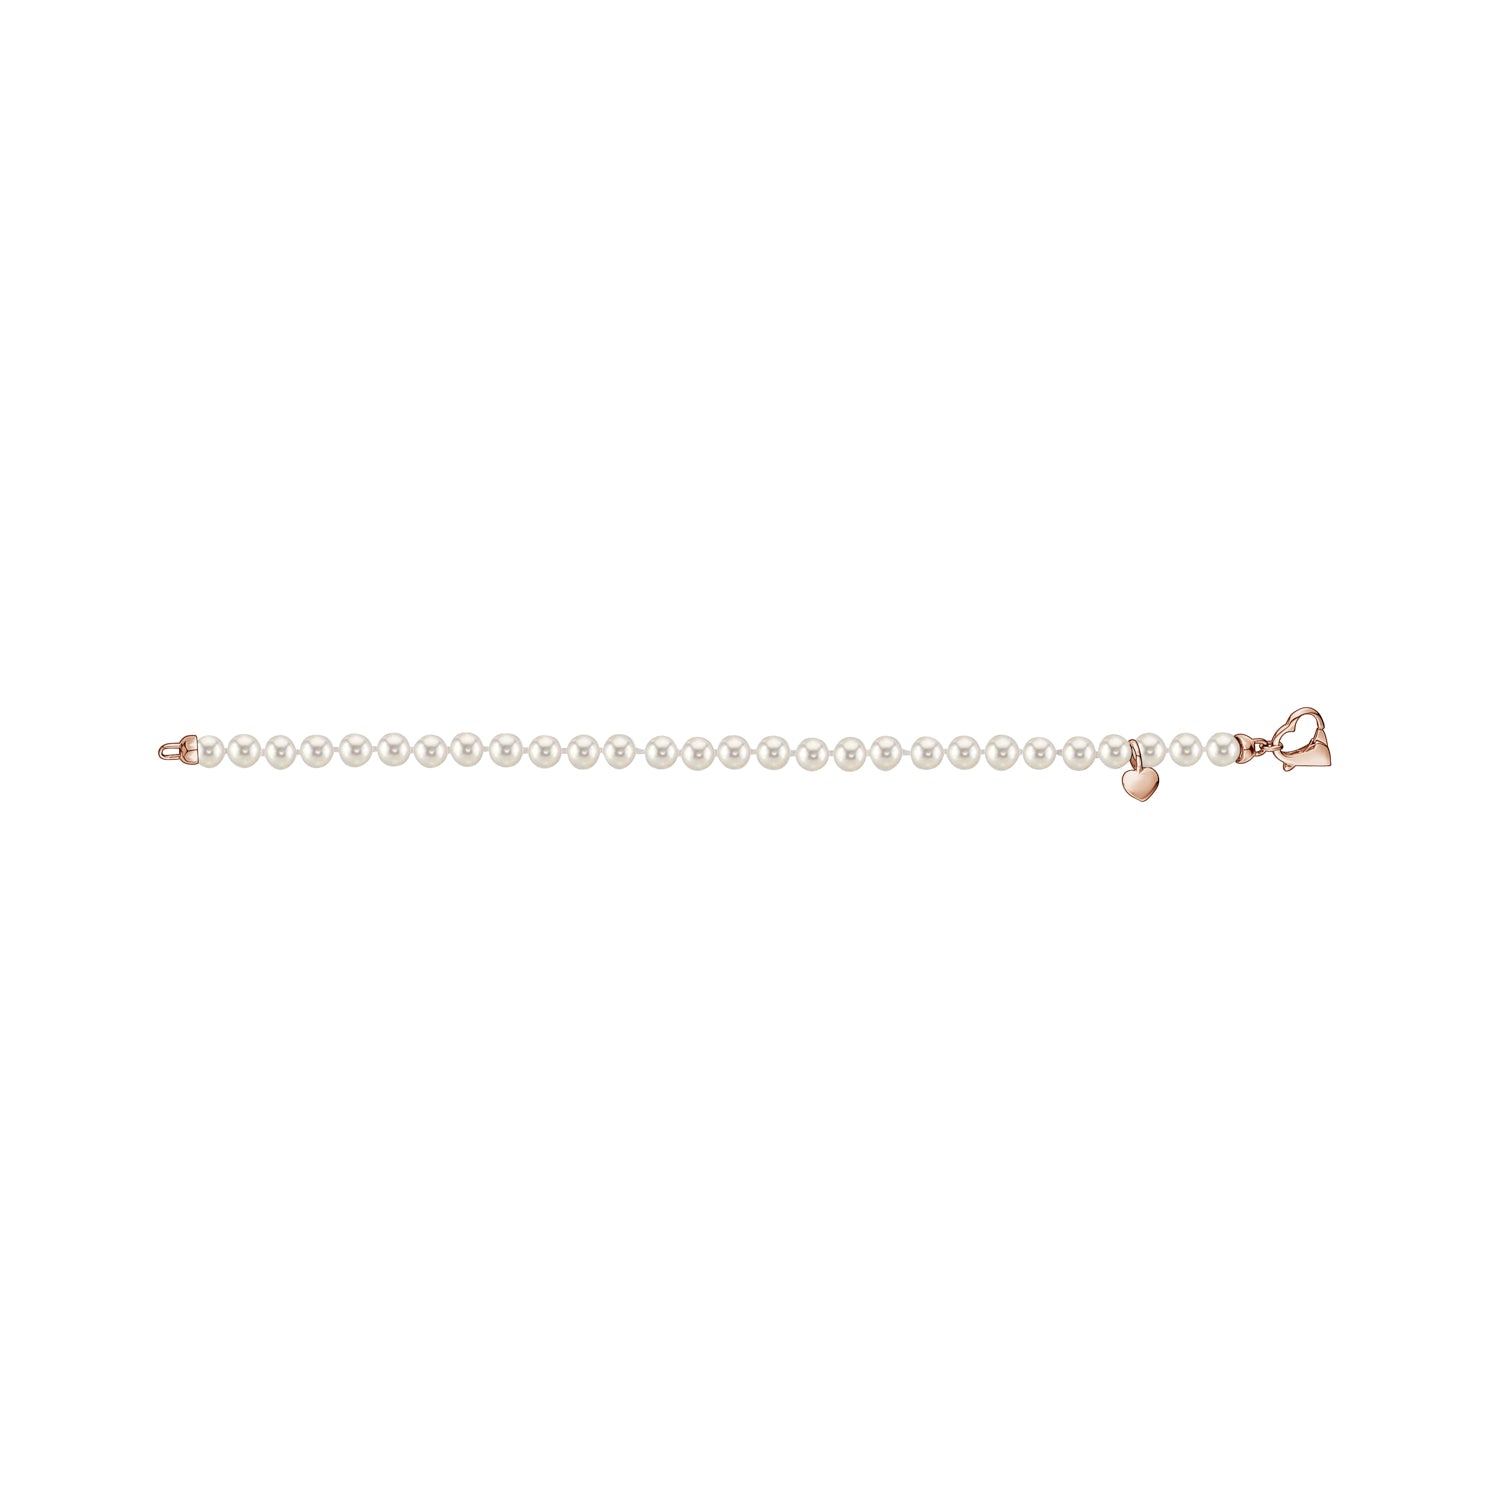 White Round Freshwater Cultured Pearl Bracelet for Girls 5mm Sterling Silver Heart Clasp and Charm 6.5"